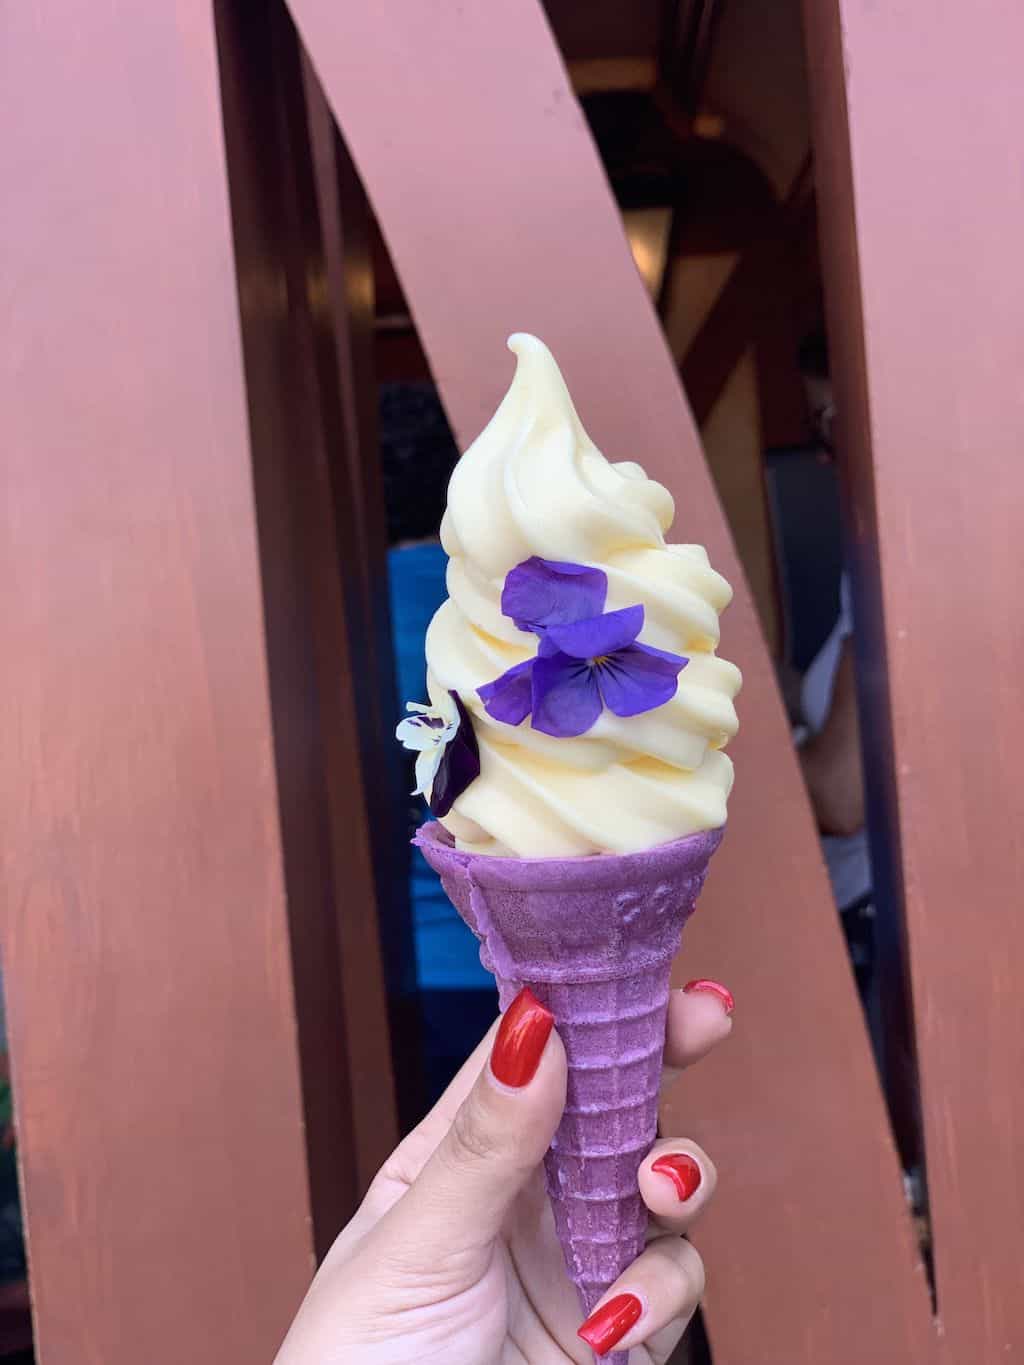 Whether you’re looking for a refreshing cool treat or a savory snack, you won’t be disappointed with our current favorite summer treats at Disney!